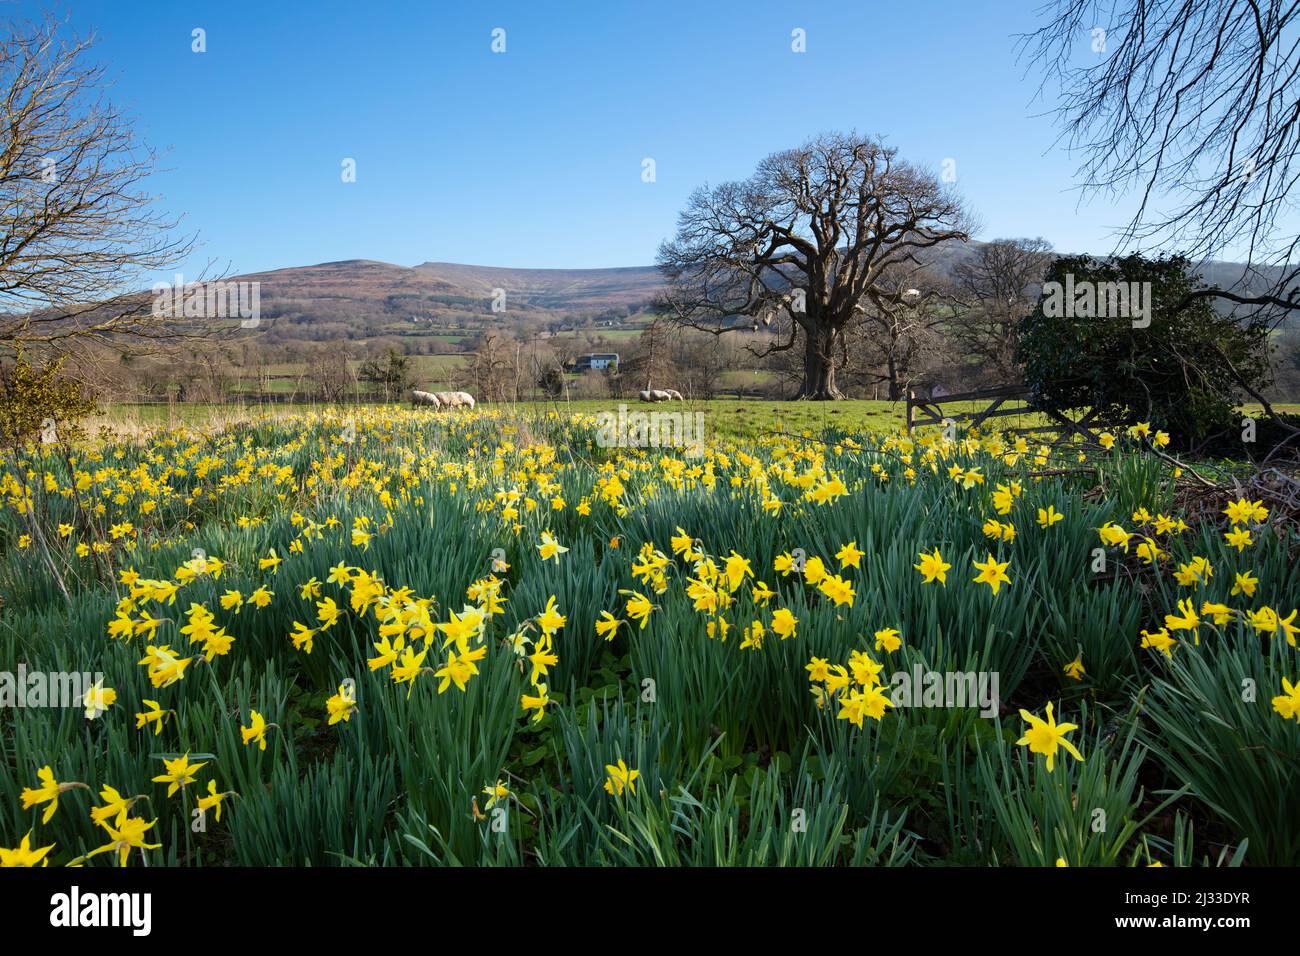 Spring Daffodils along the Usk Valley with Pen Allt-mawr mountain behind, Crickhowell, Brecon Beacons NP, Powys, Wales, United Kingdom, Europe Stock Photo